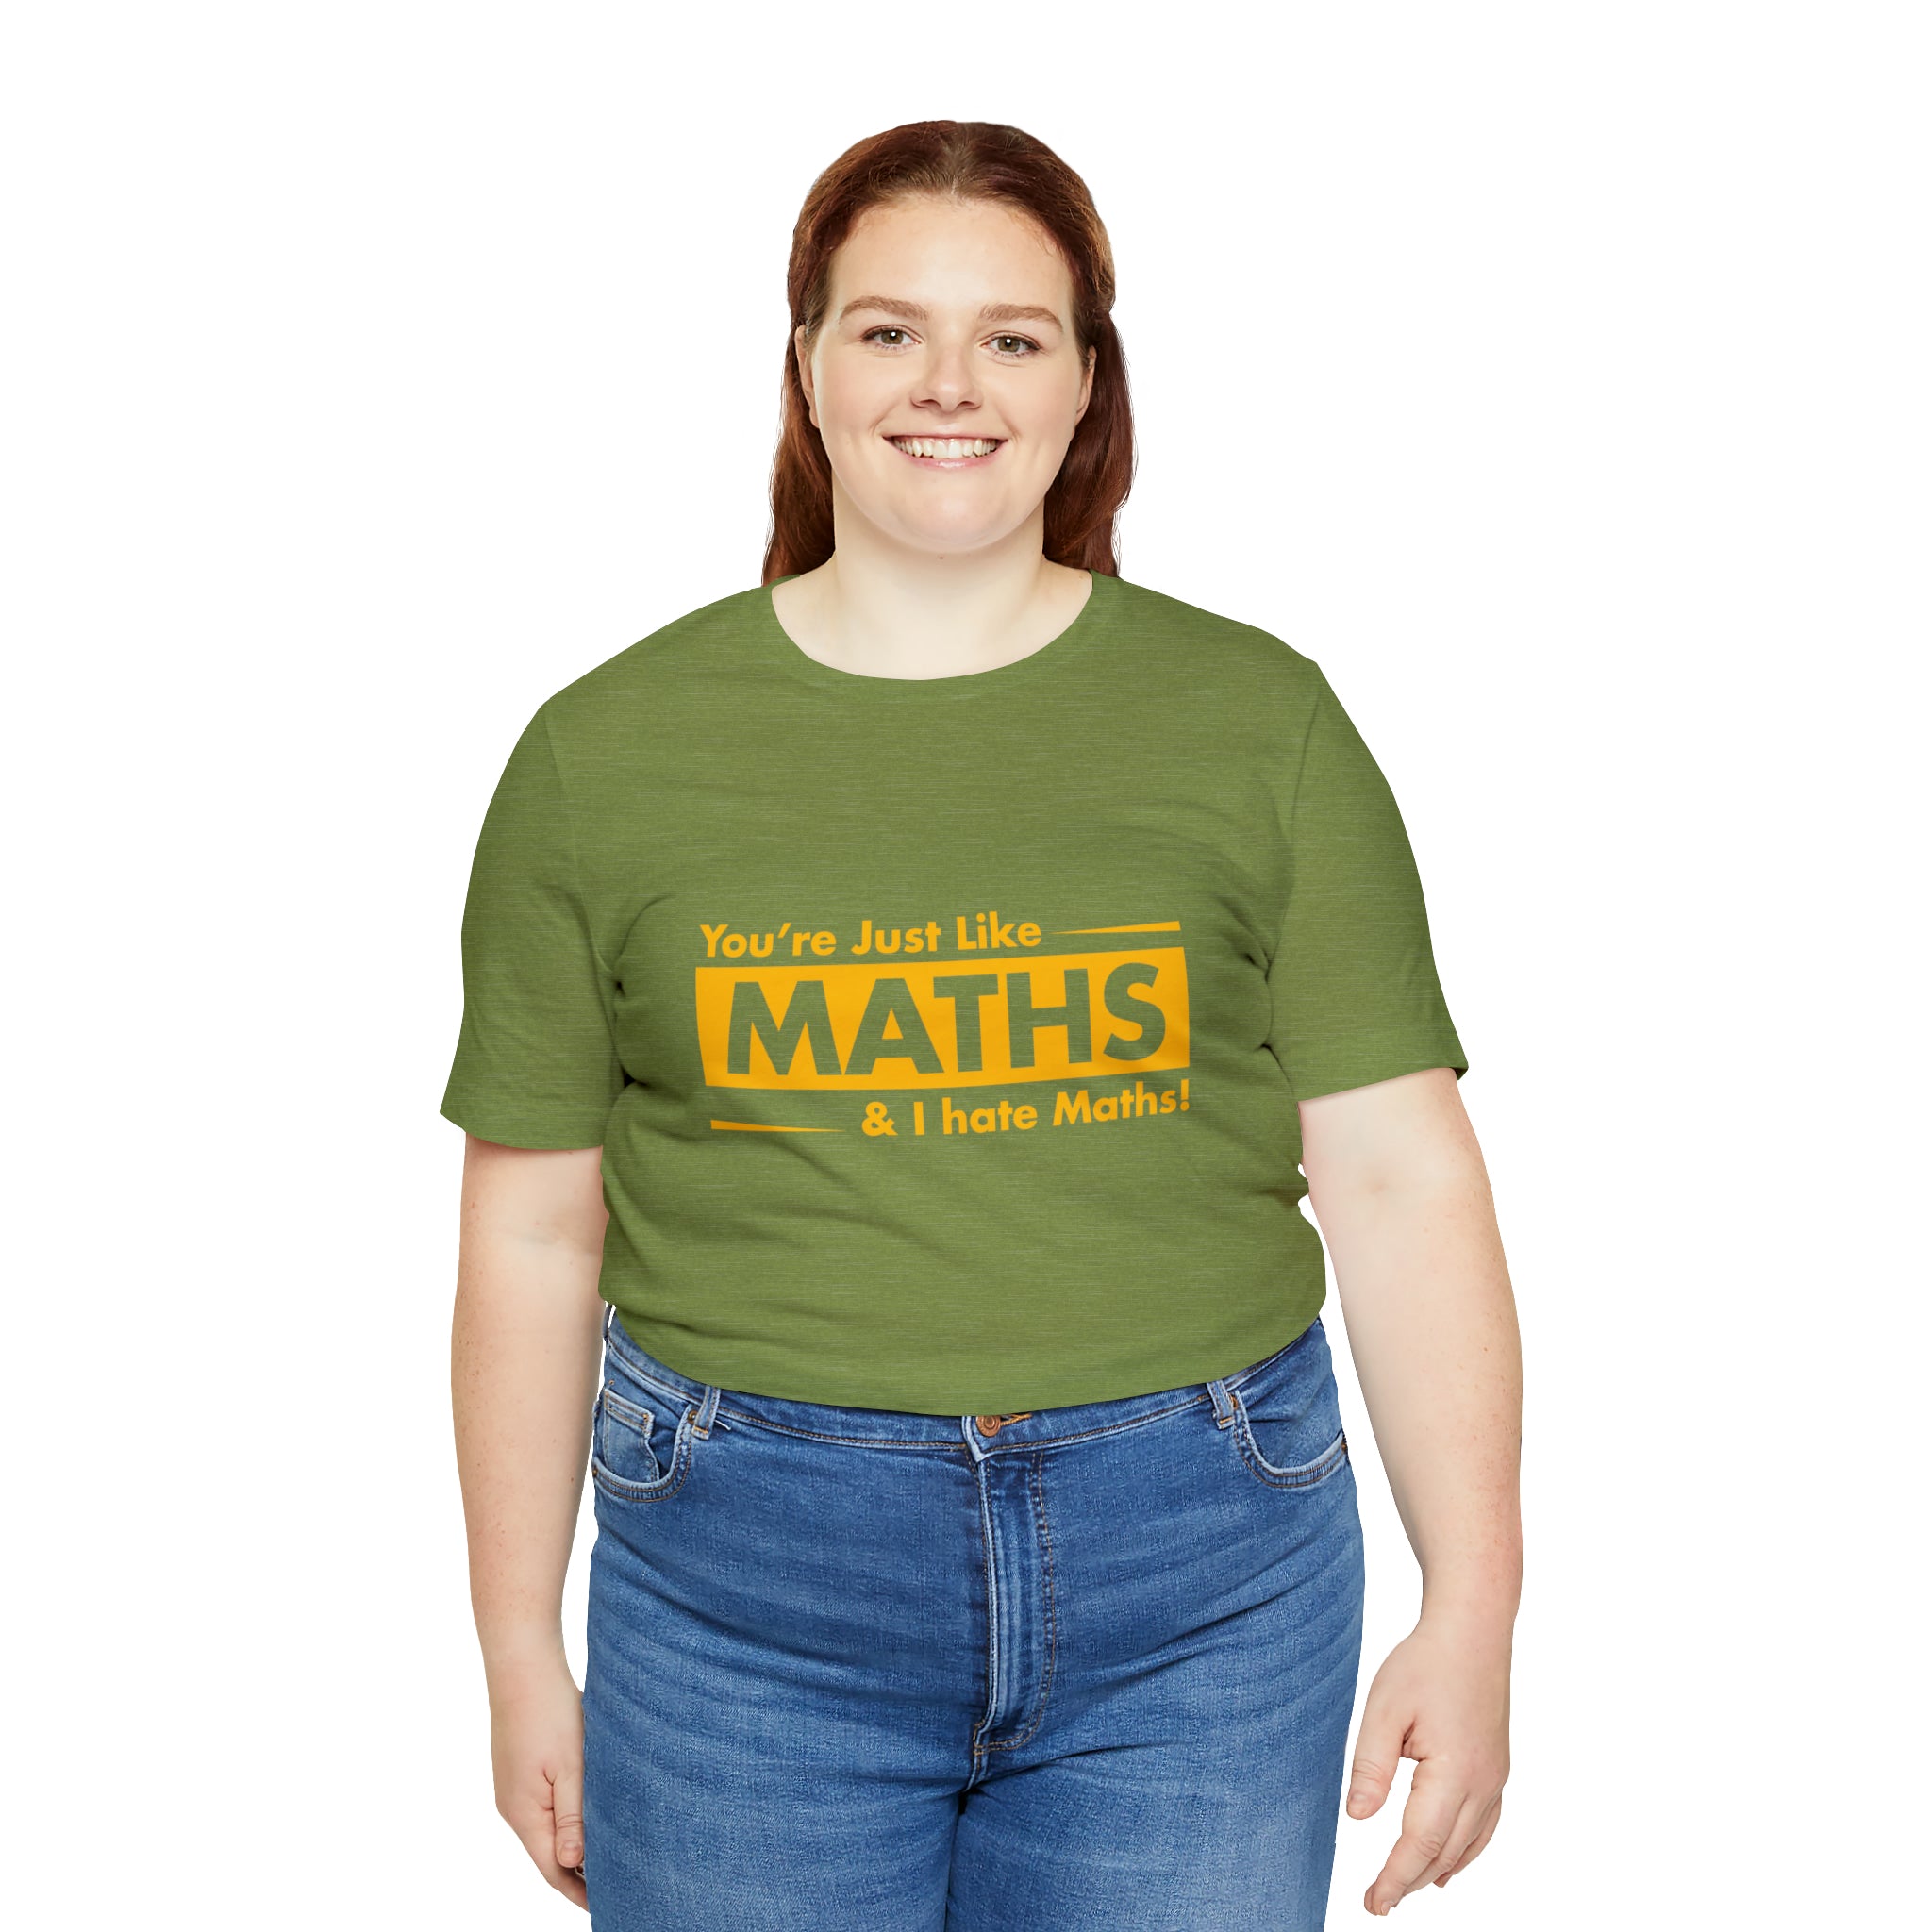 A woman with a fashion sense wearing a "You are just like maths and I hate maths" T-shirt.